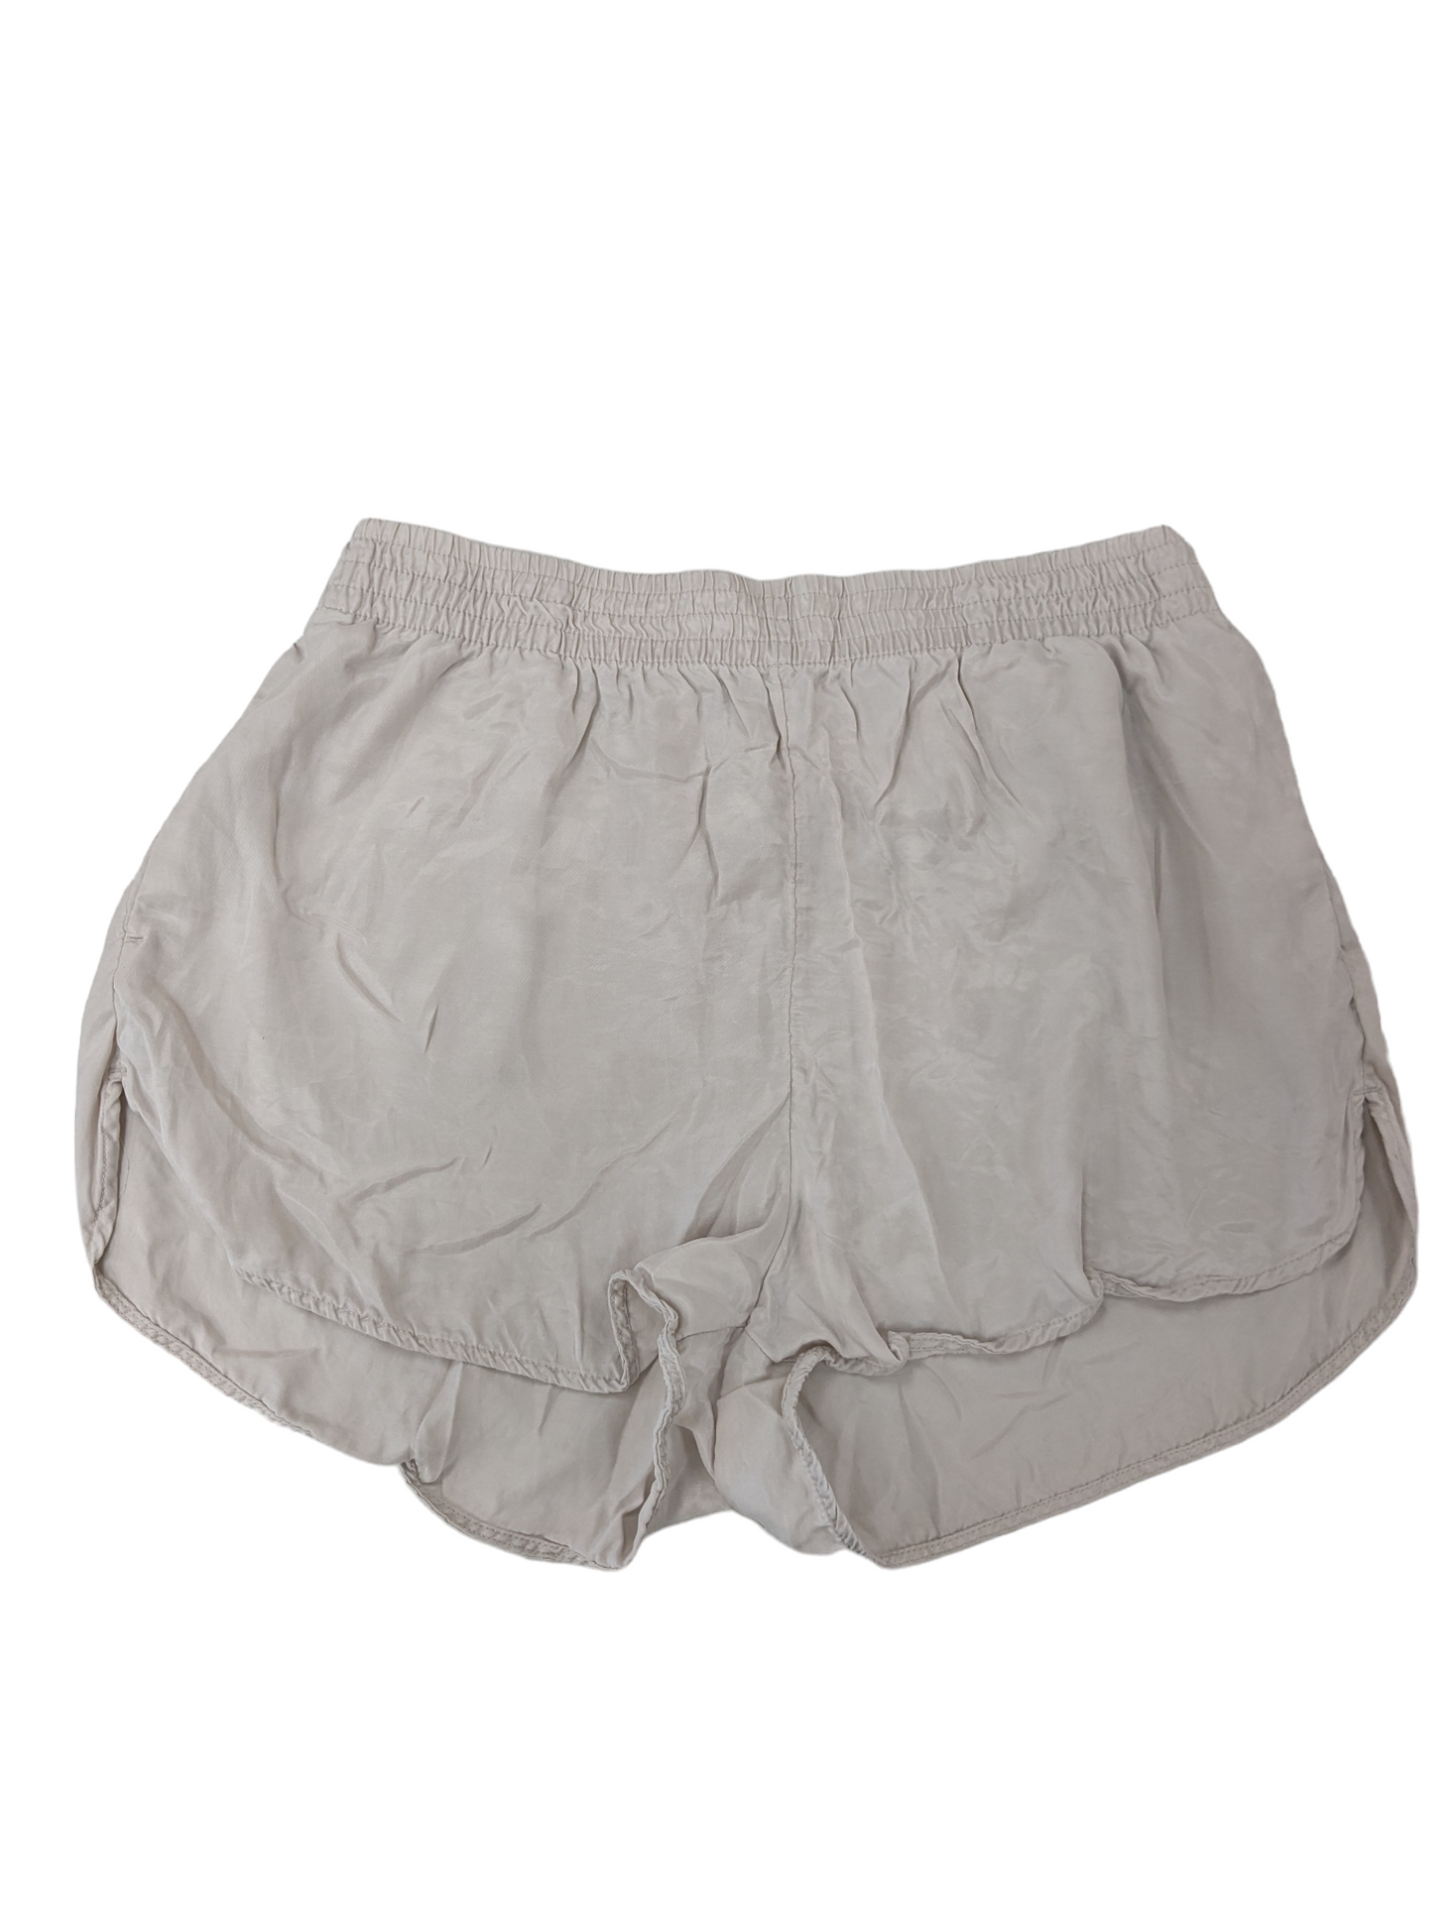 Taupe Shorts H&m, Size L